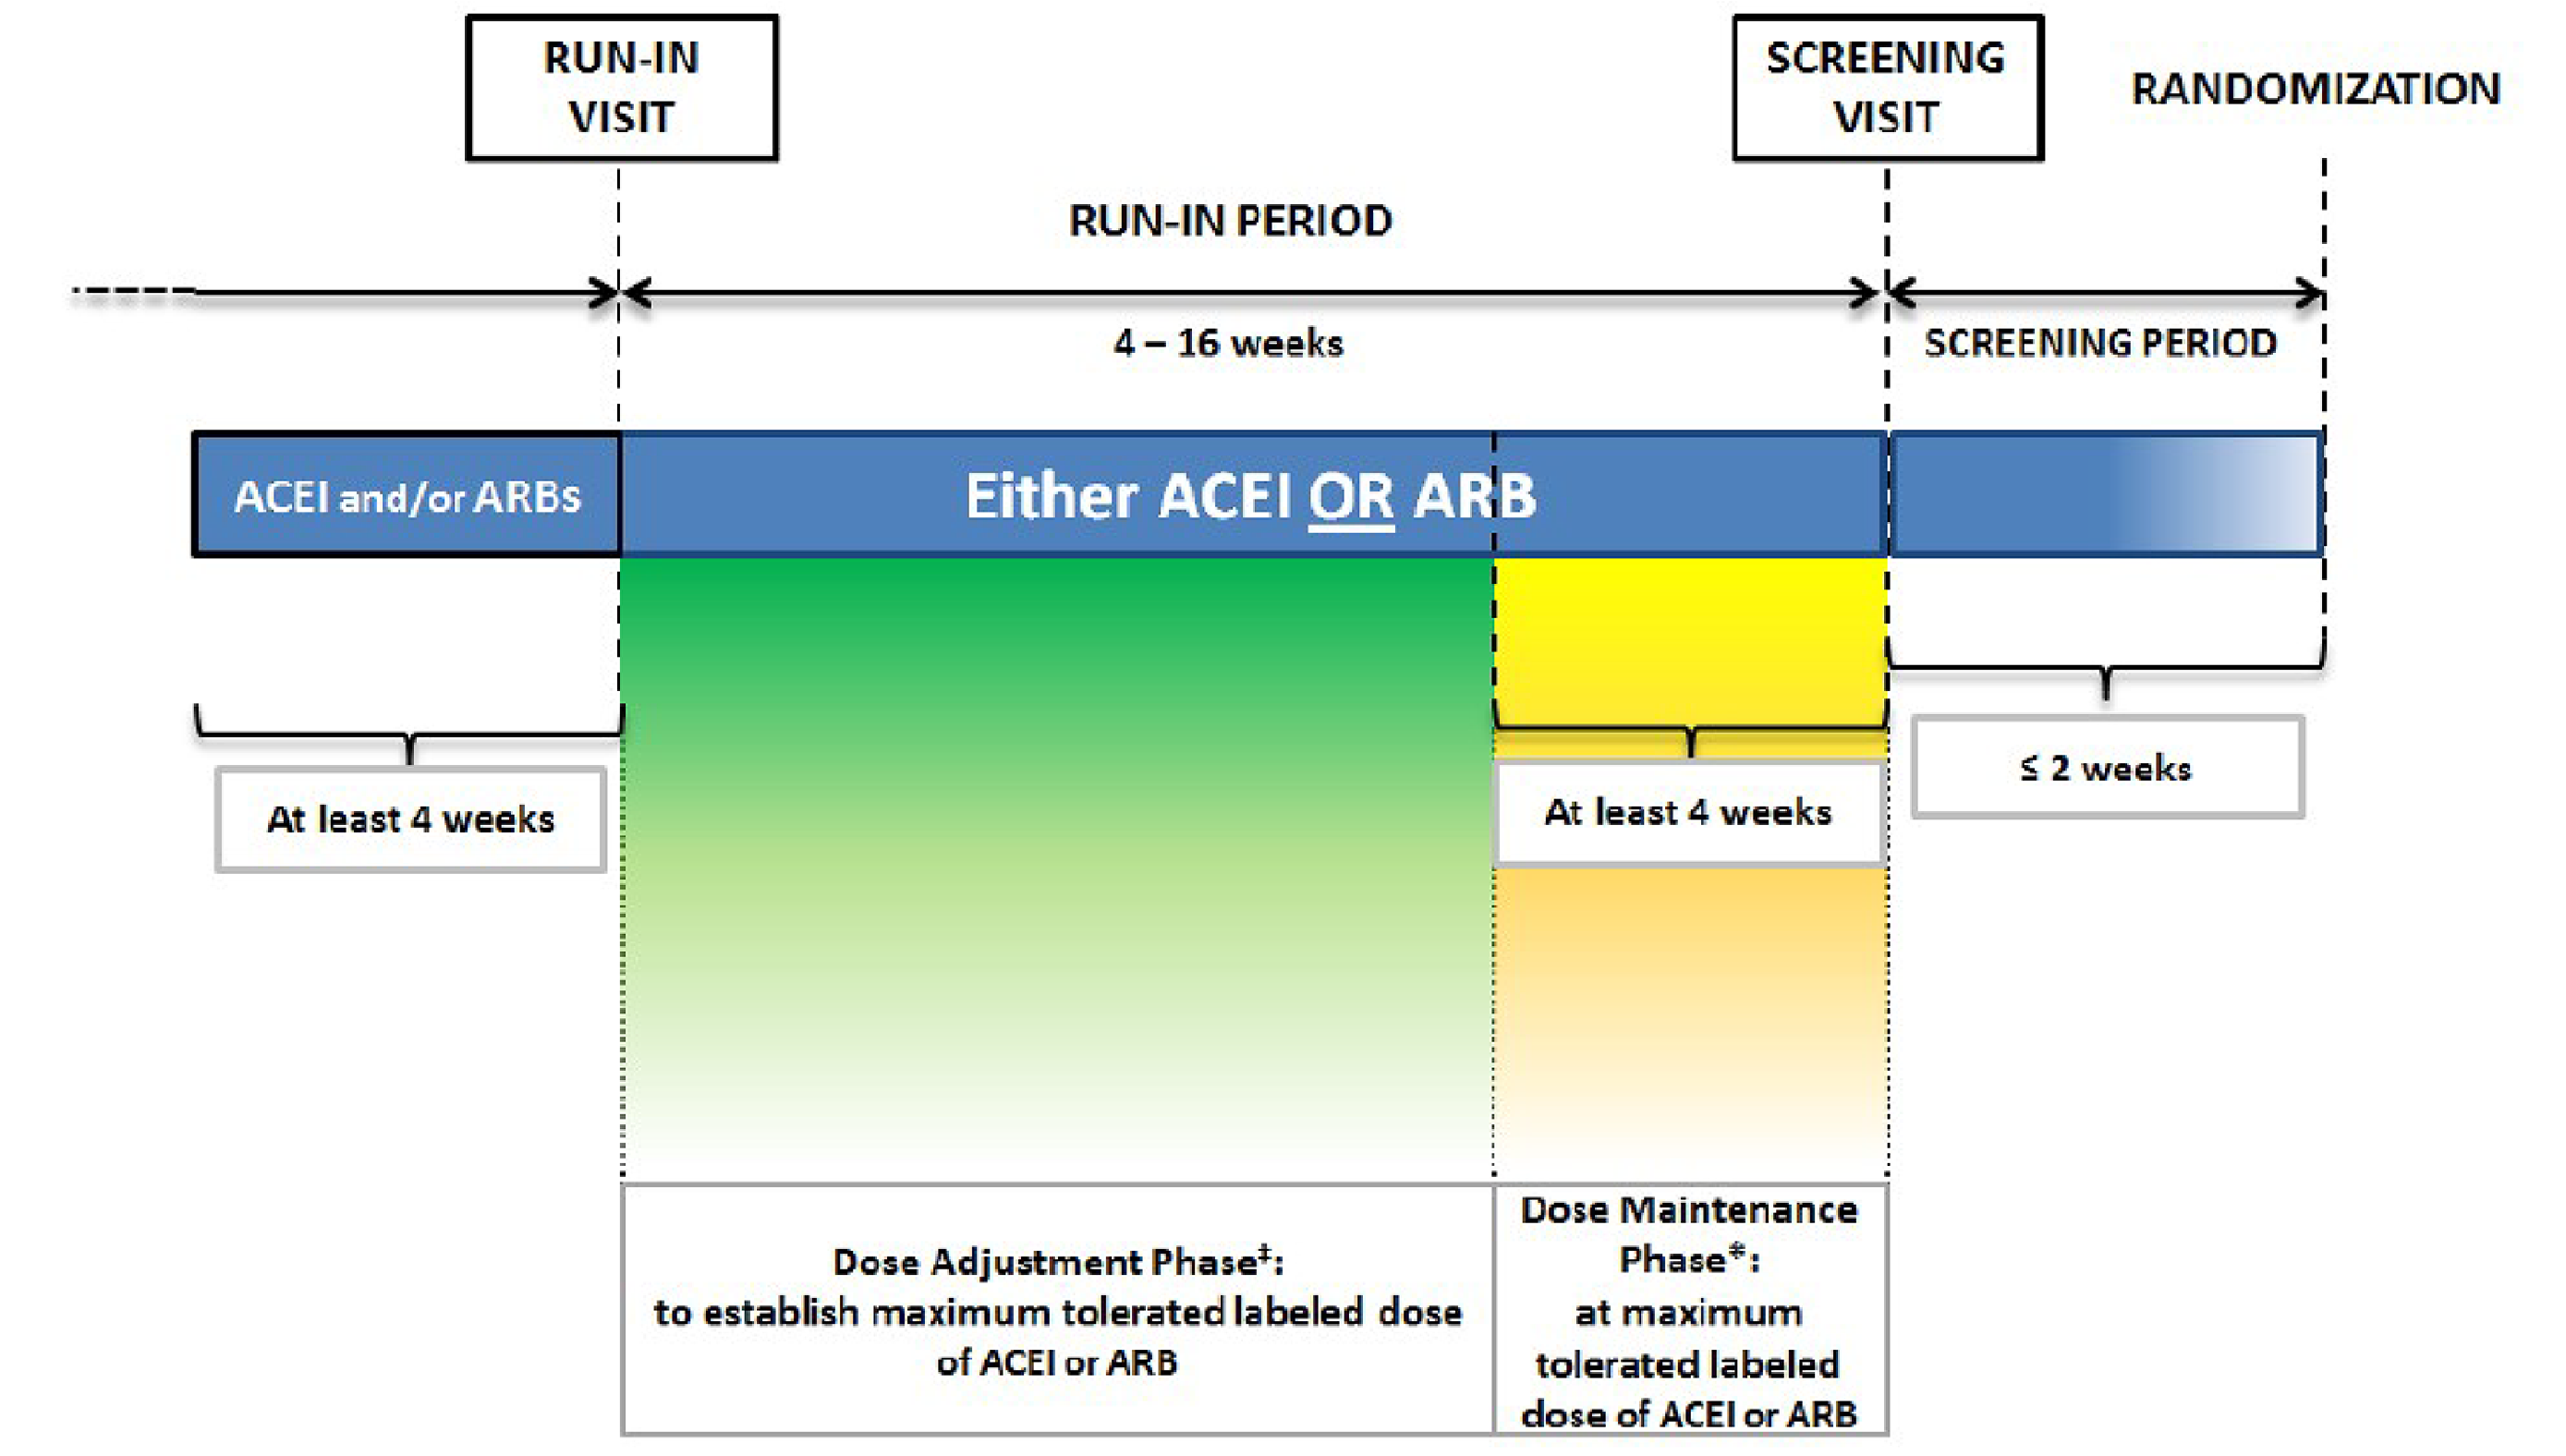 For at least 4 weeks before the run-in visit, all patients must be treated with either an ACE inhibitor or an ARB, or both. Starting with the run-in visit, patients should be treated with only an ACE inhibitor or an ARB. For at least 4 weeks before the screening visit, patients should be treated with the maximum tolerated labelled dose of only an ACE inhibitor or an ARB.